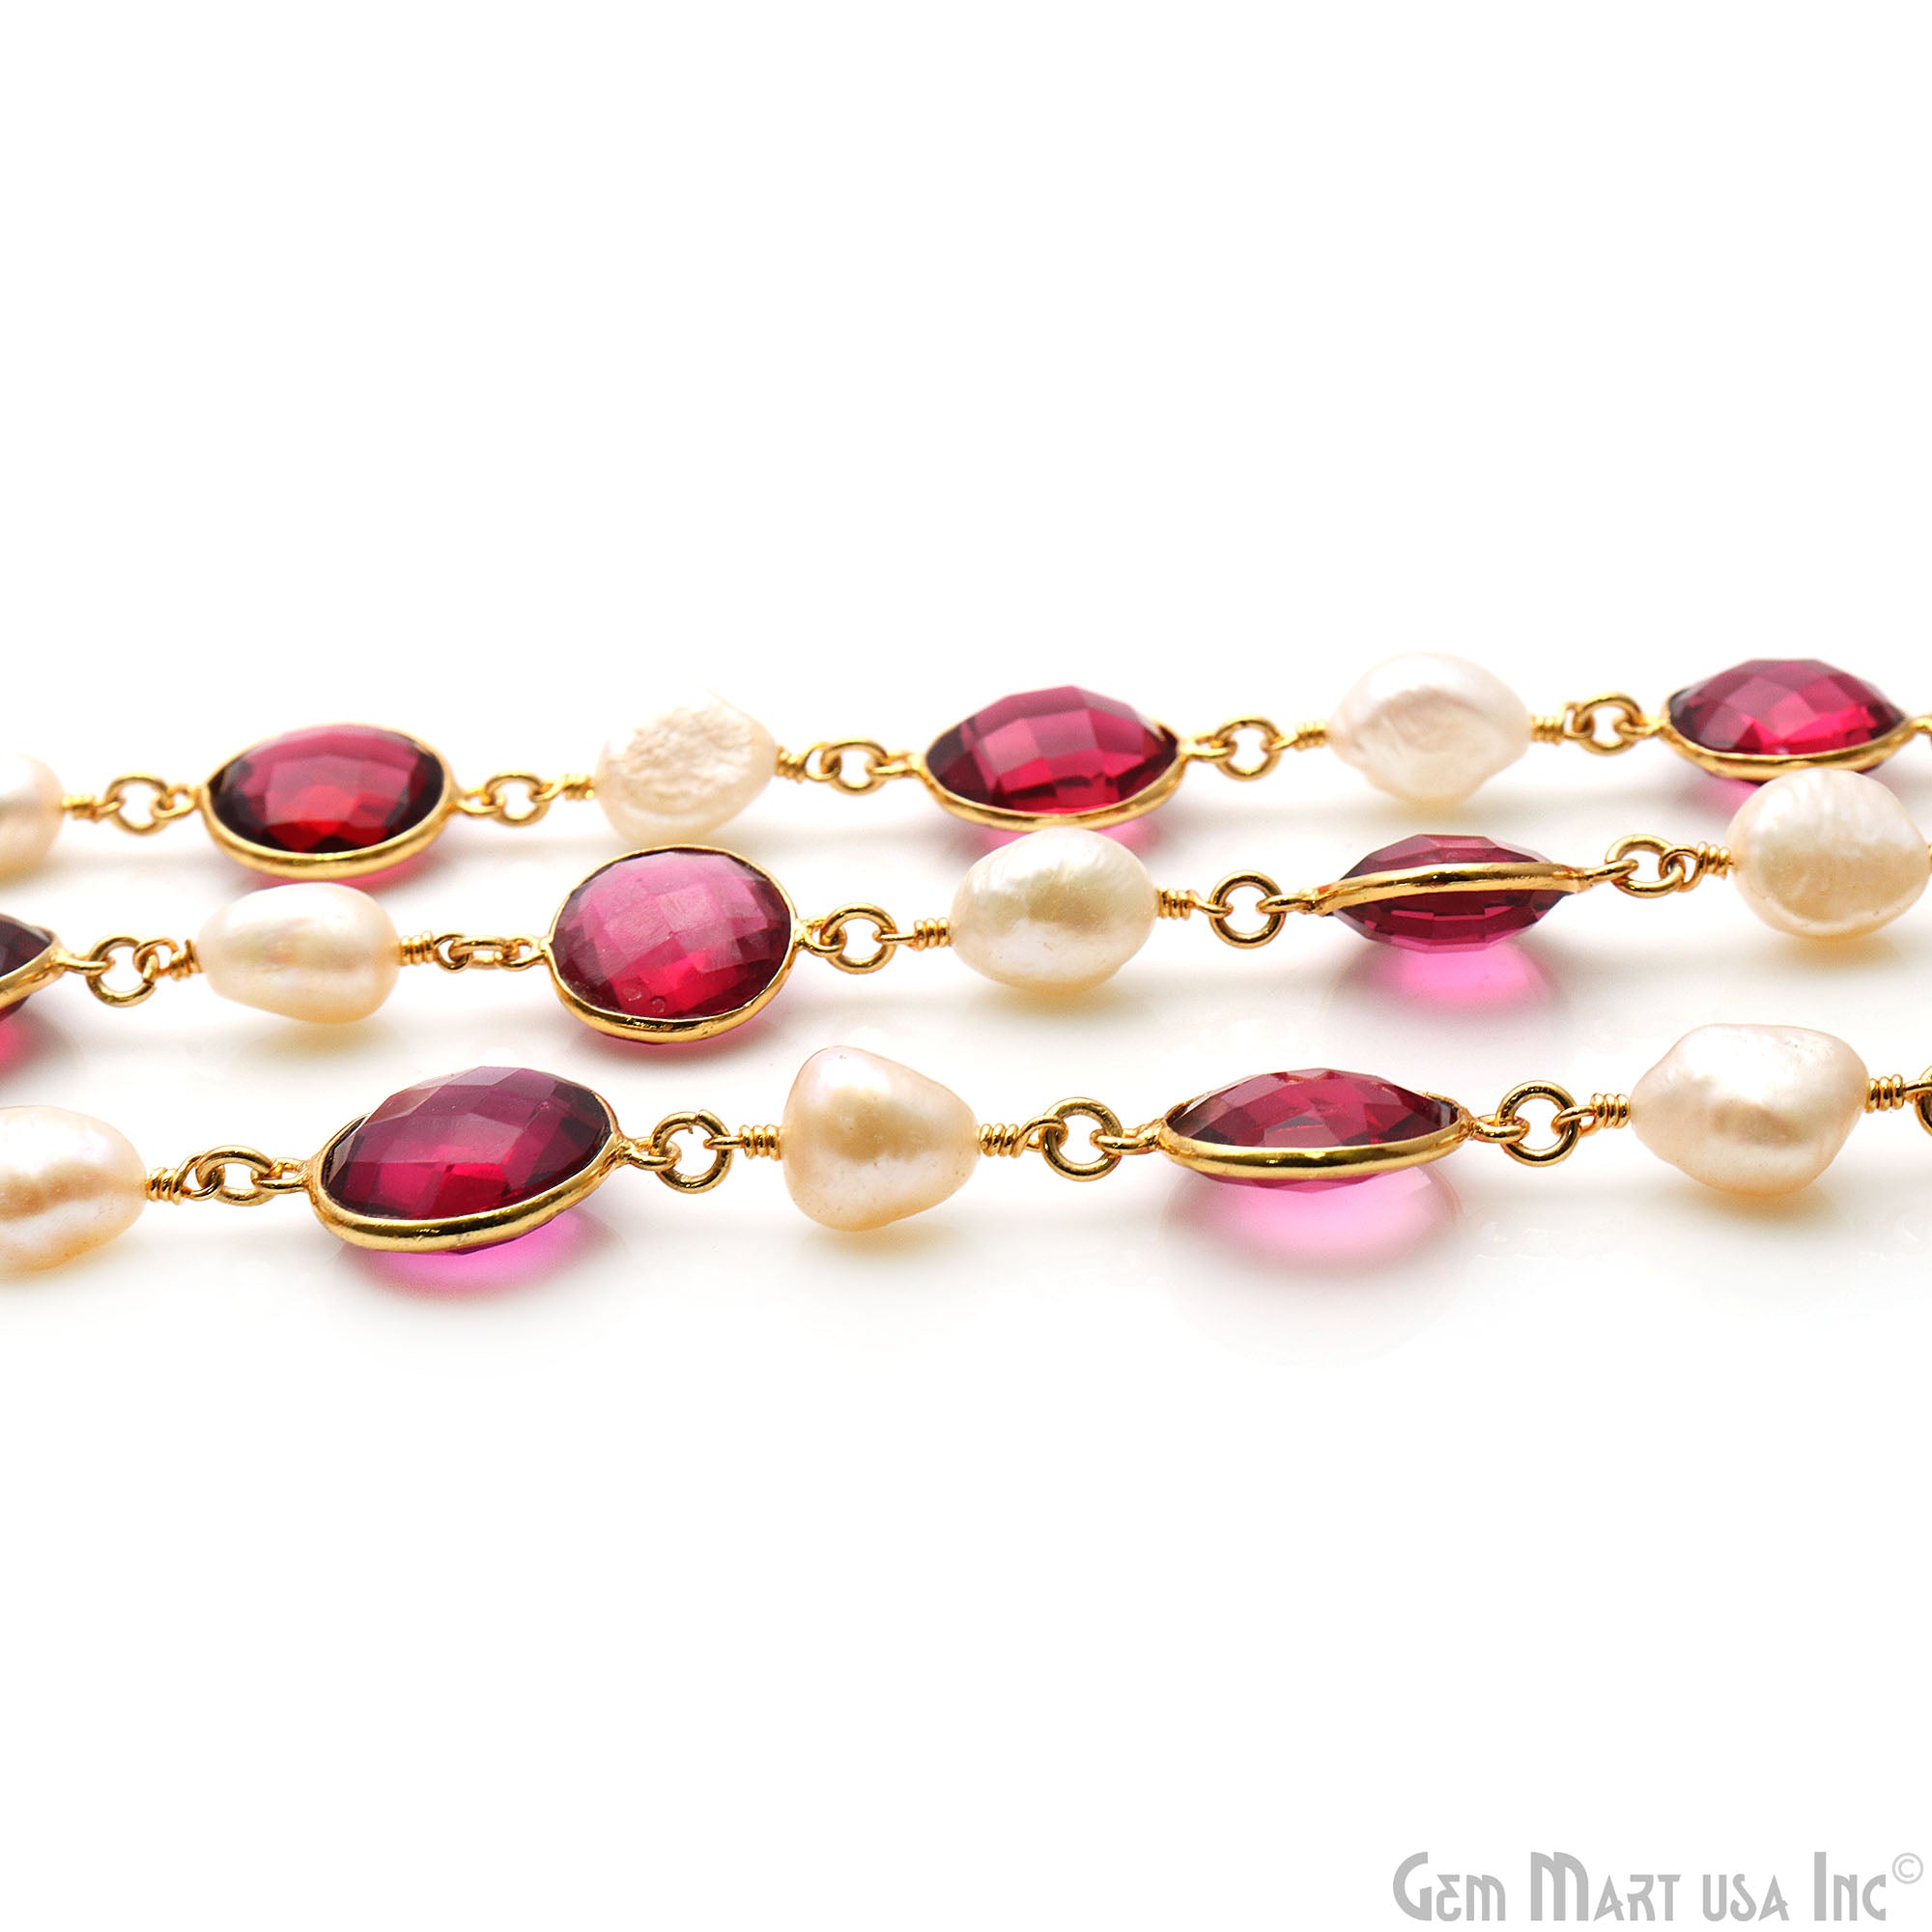 Pearl Free Form & Pink Tourmaline 10-15mm Gold Bezel Connector Chain